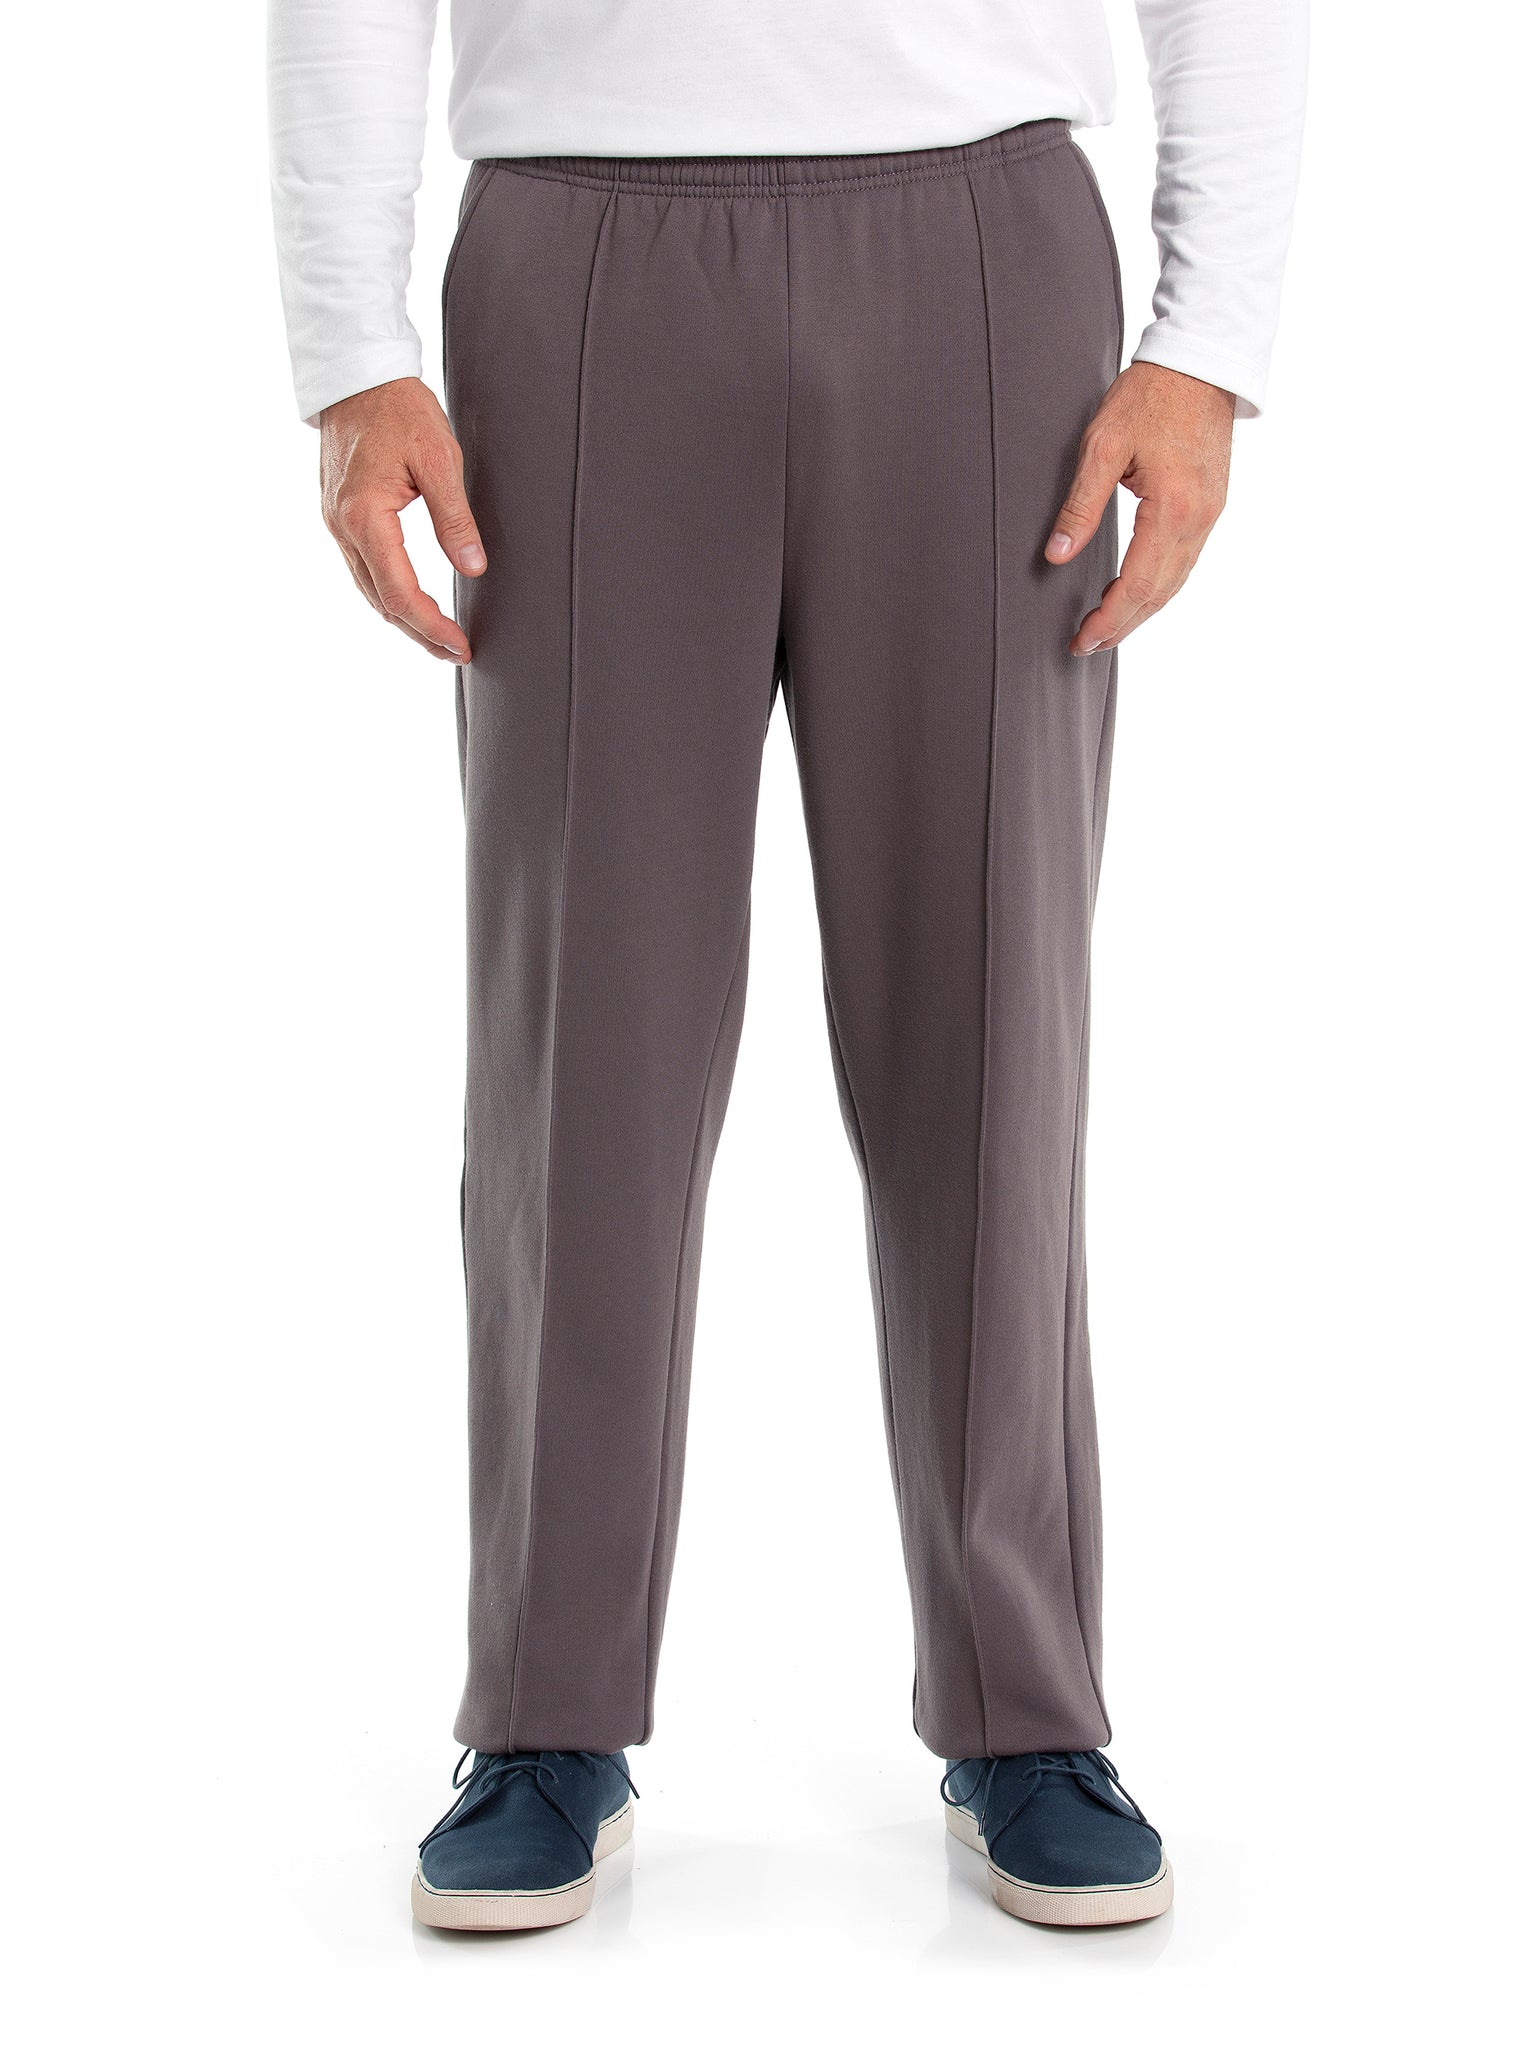 breakaway pants for concealed carry review